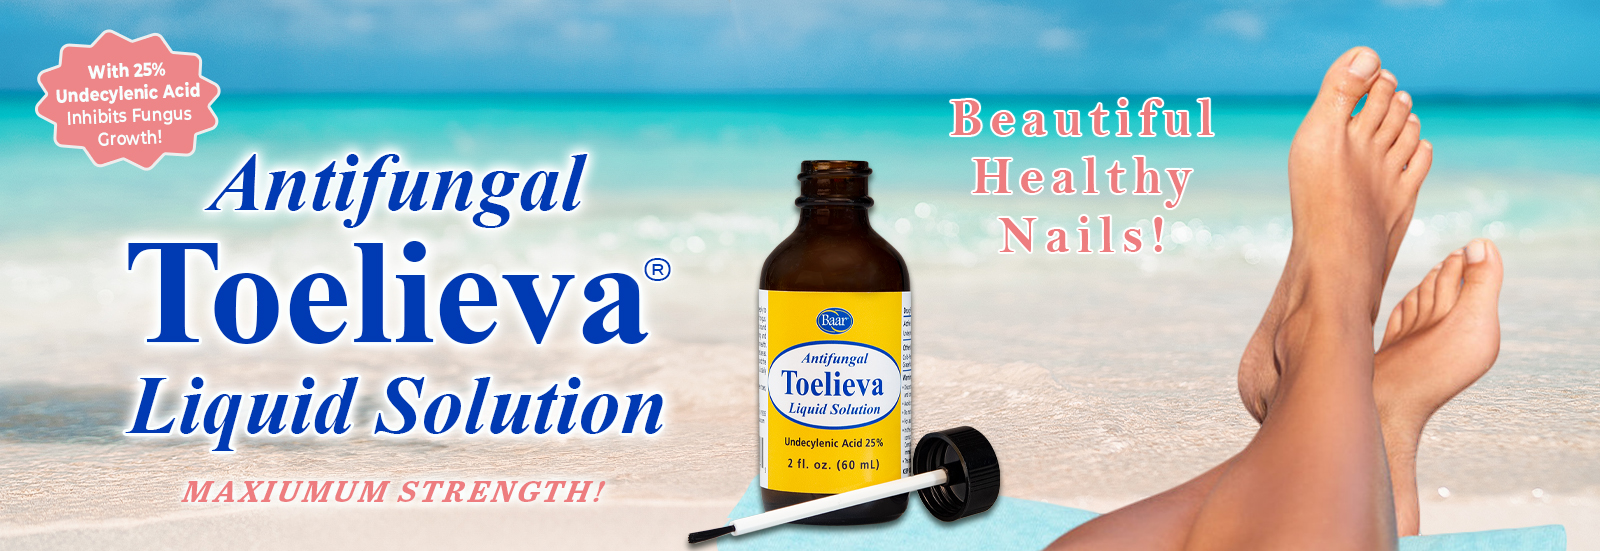 Toelieva Antifungal Liquid Solution: Provides relief from toenail fungus and promotes healthy nails